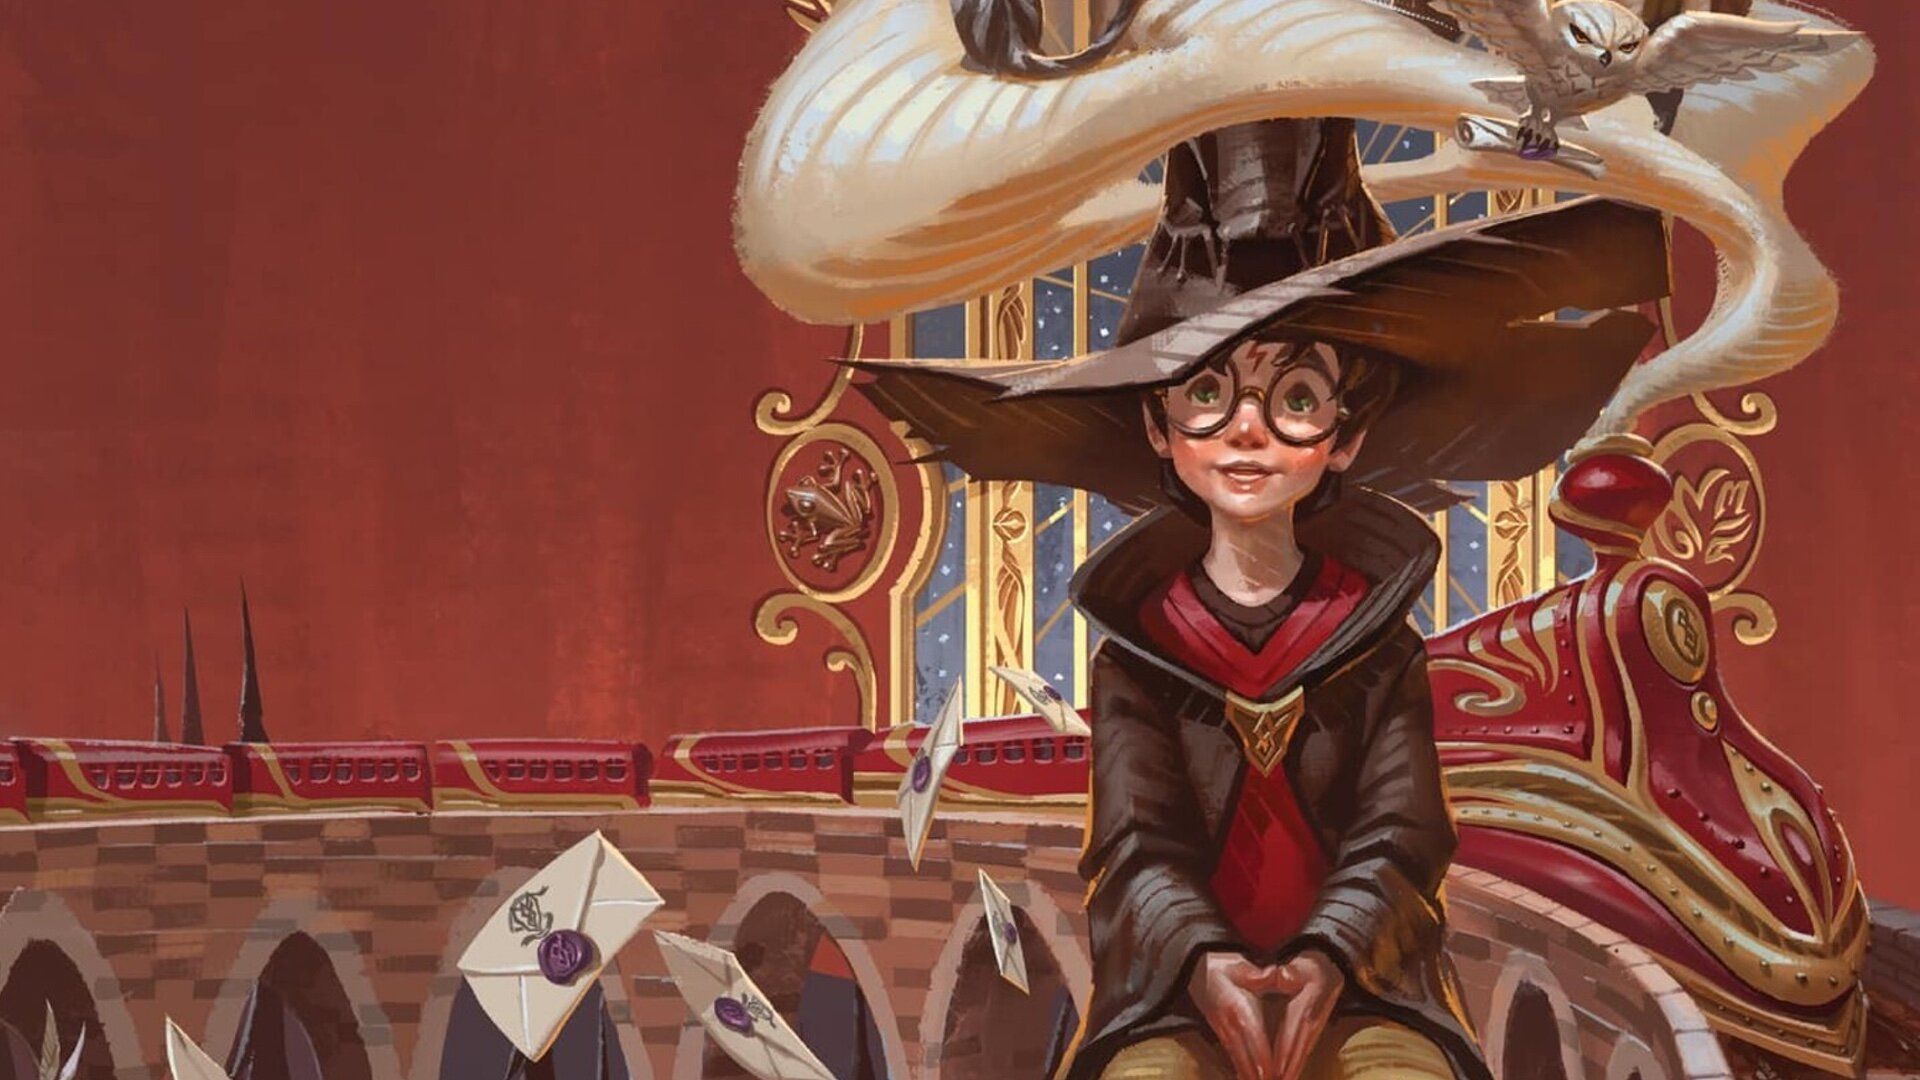 Beautiful New Book Cover Art for the HARRY POTTER Series Created for the 20th Anniversary